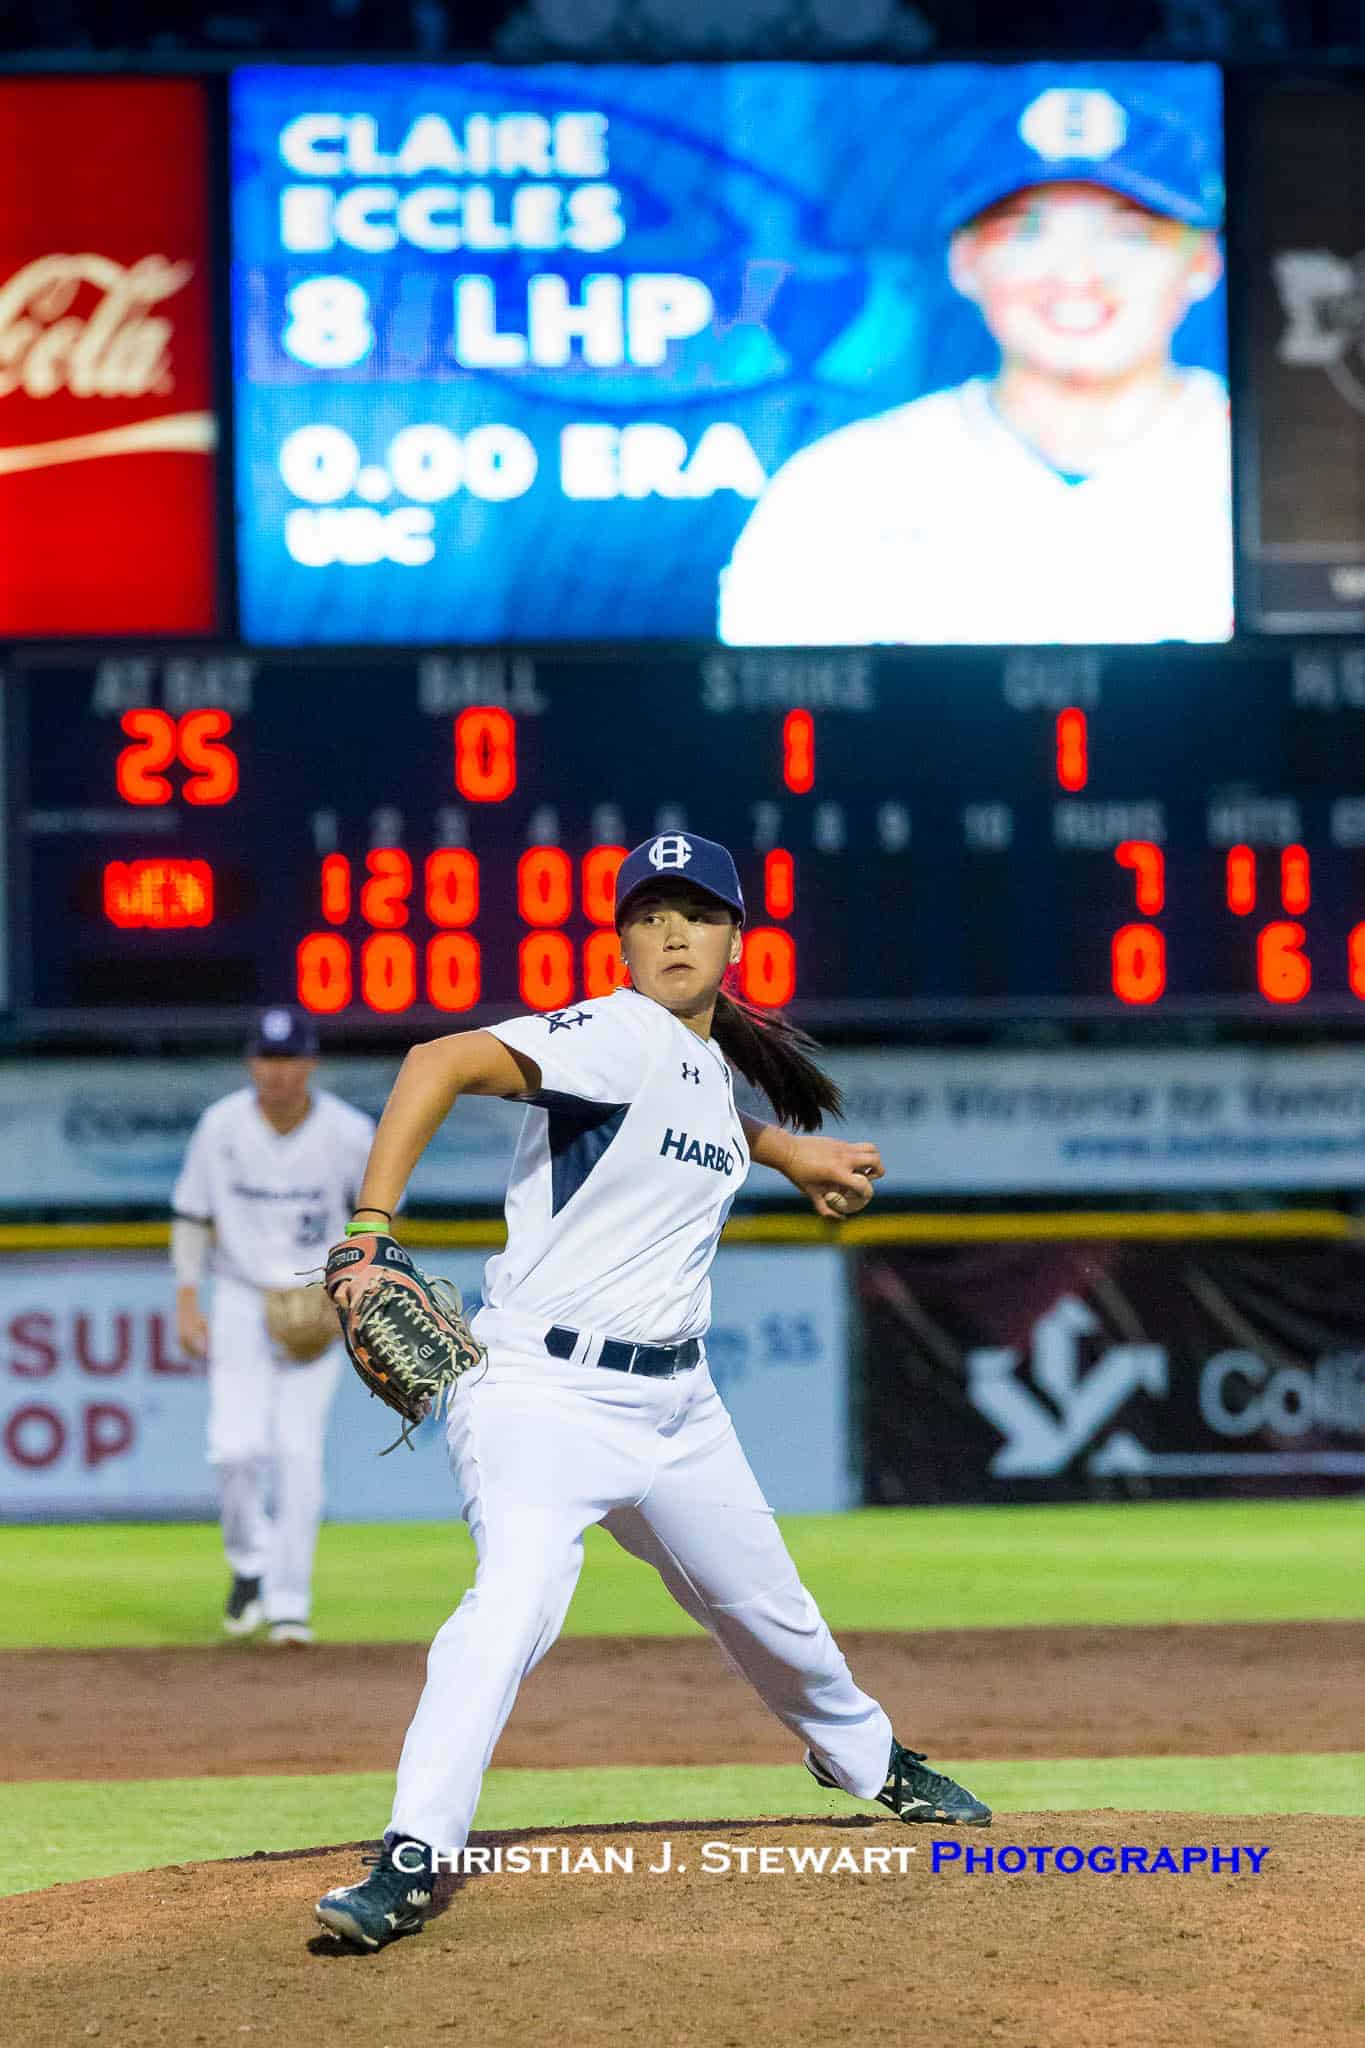 HarbourCats Lose Series Finale to Wenatchee but Make History as Claire Eccles Plays First Game